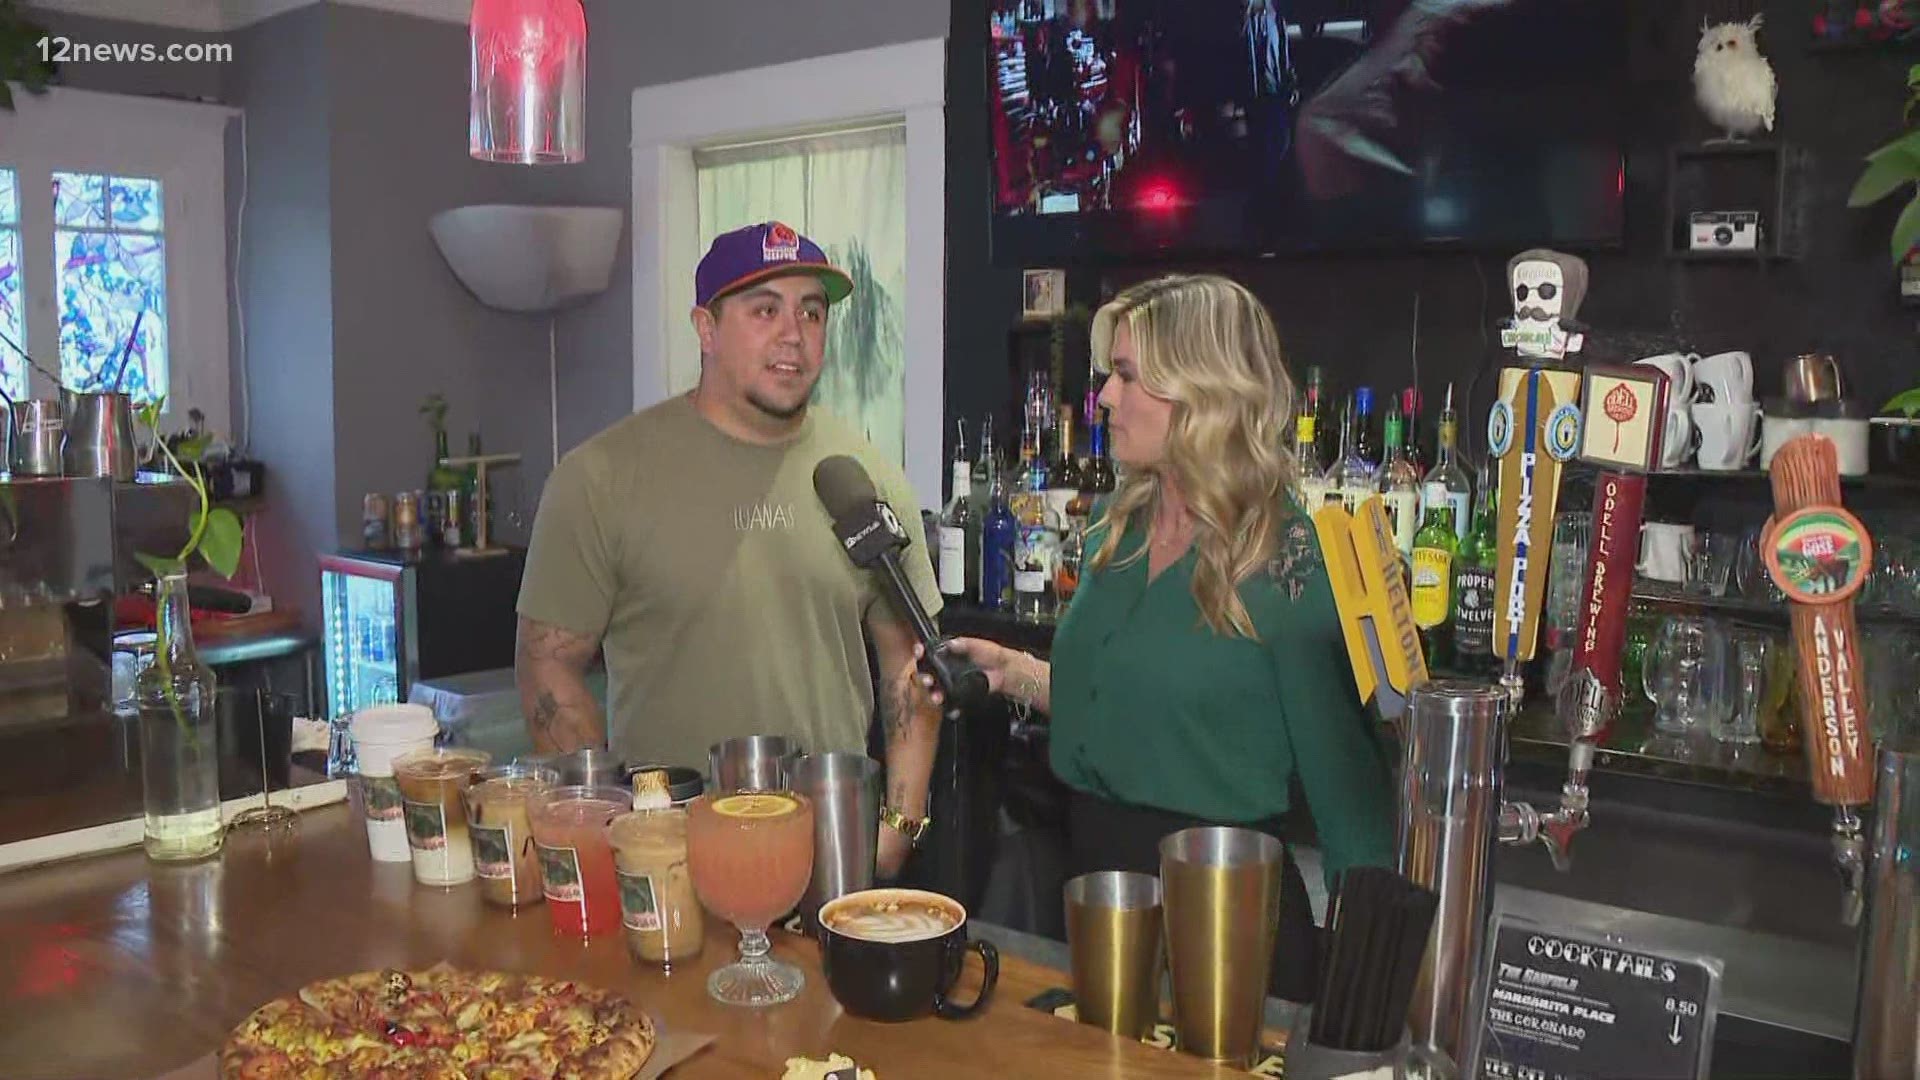 Start your day off right with some Phoenix Suns inspired drinks from Luana's Coffee and Beer. Rachel Cole has the story.